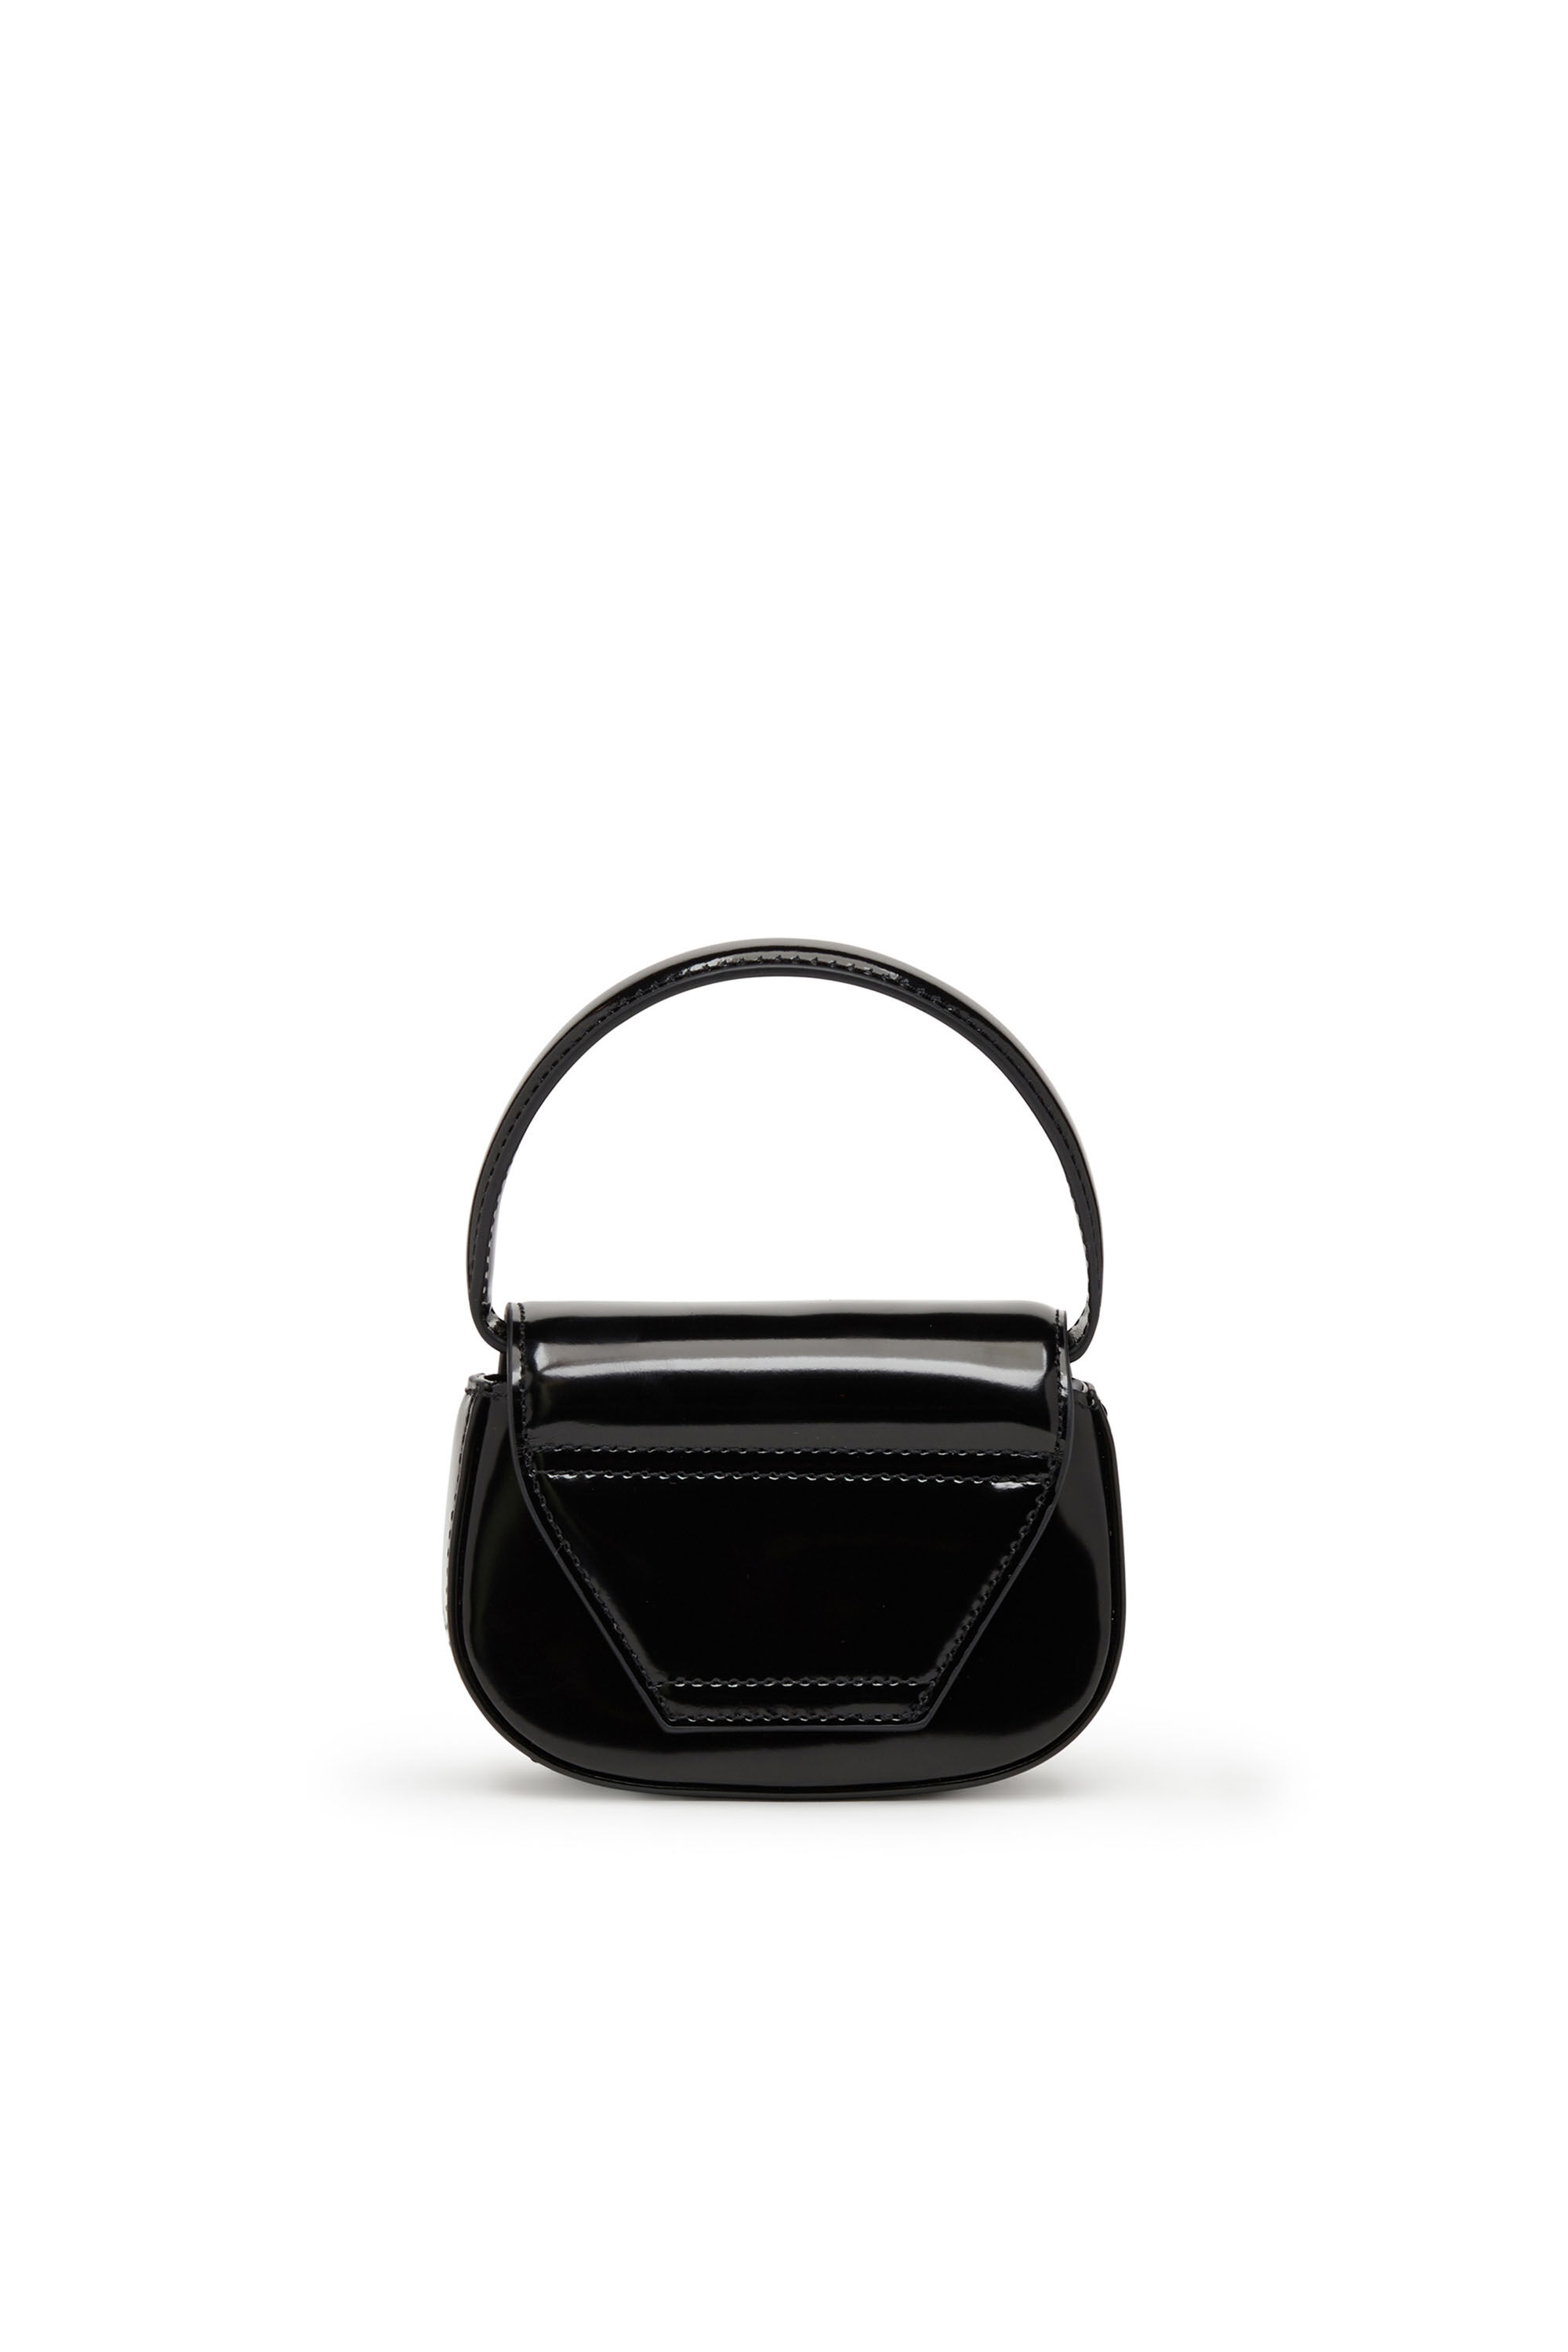 Diesel - 1DR-XS-S, Woman 1DR-XS-S-Iconic mini bag in mirrored leather in Black - Image 3